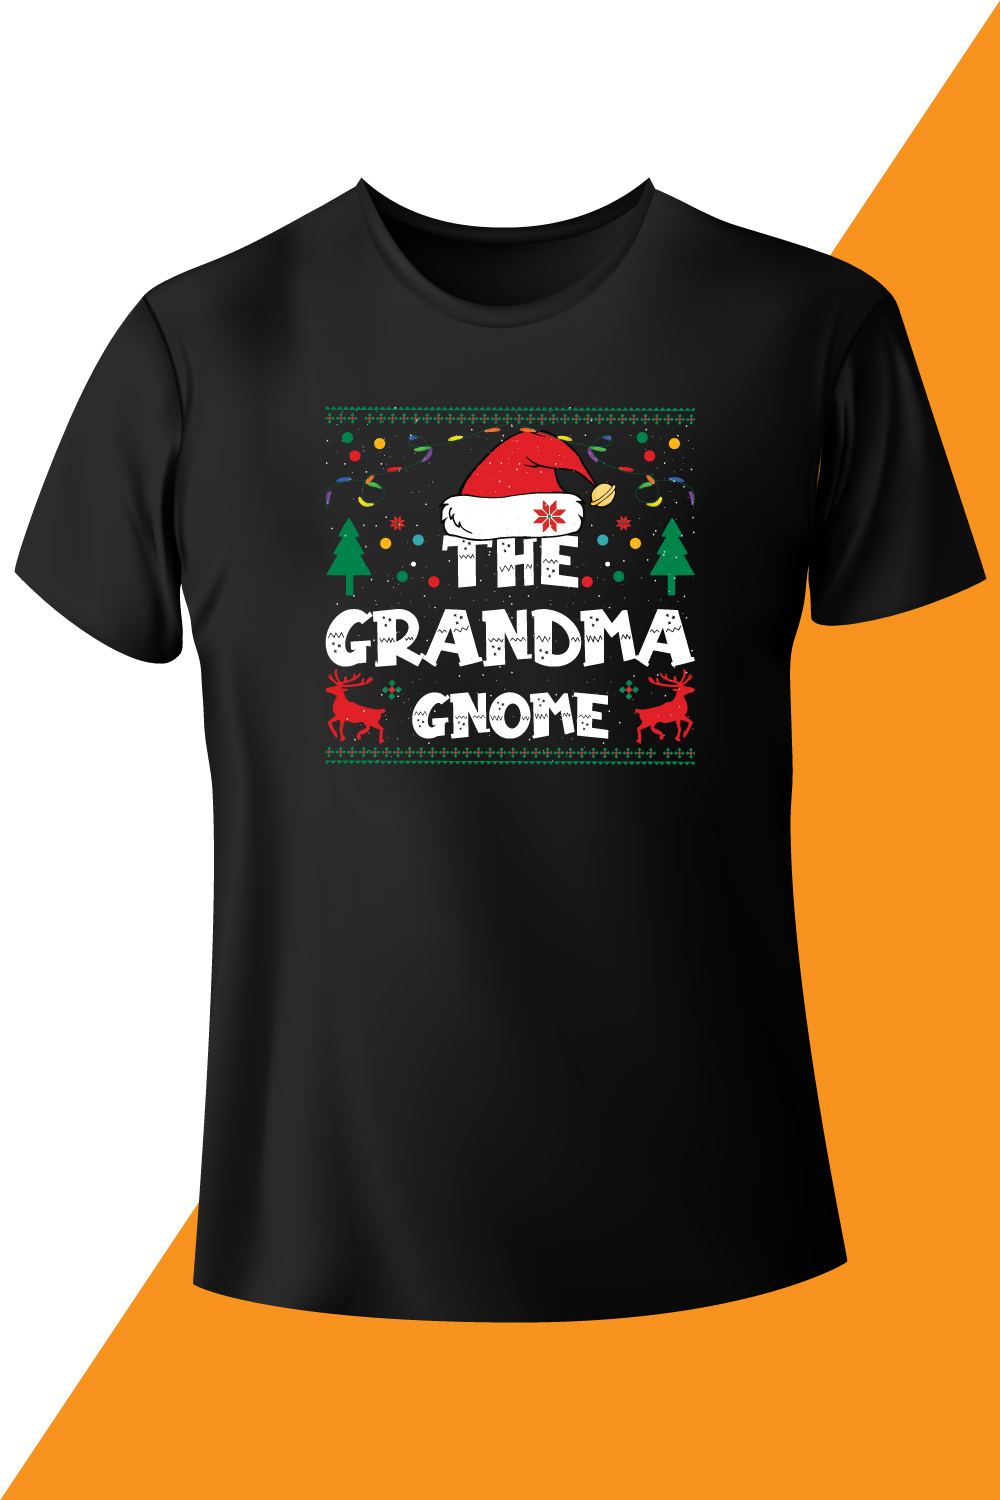 Image of a black t-shirt with the magnificent inscription The grandma gnome.